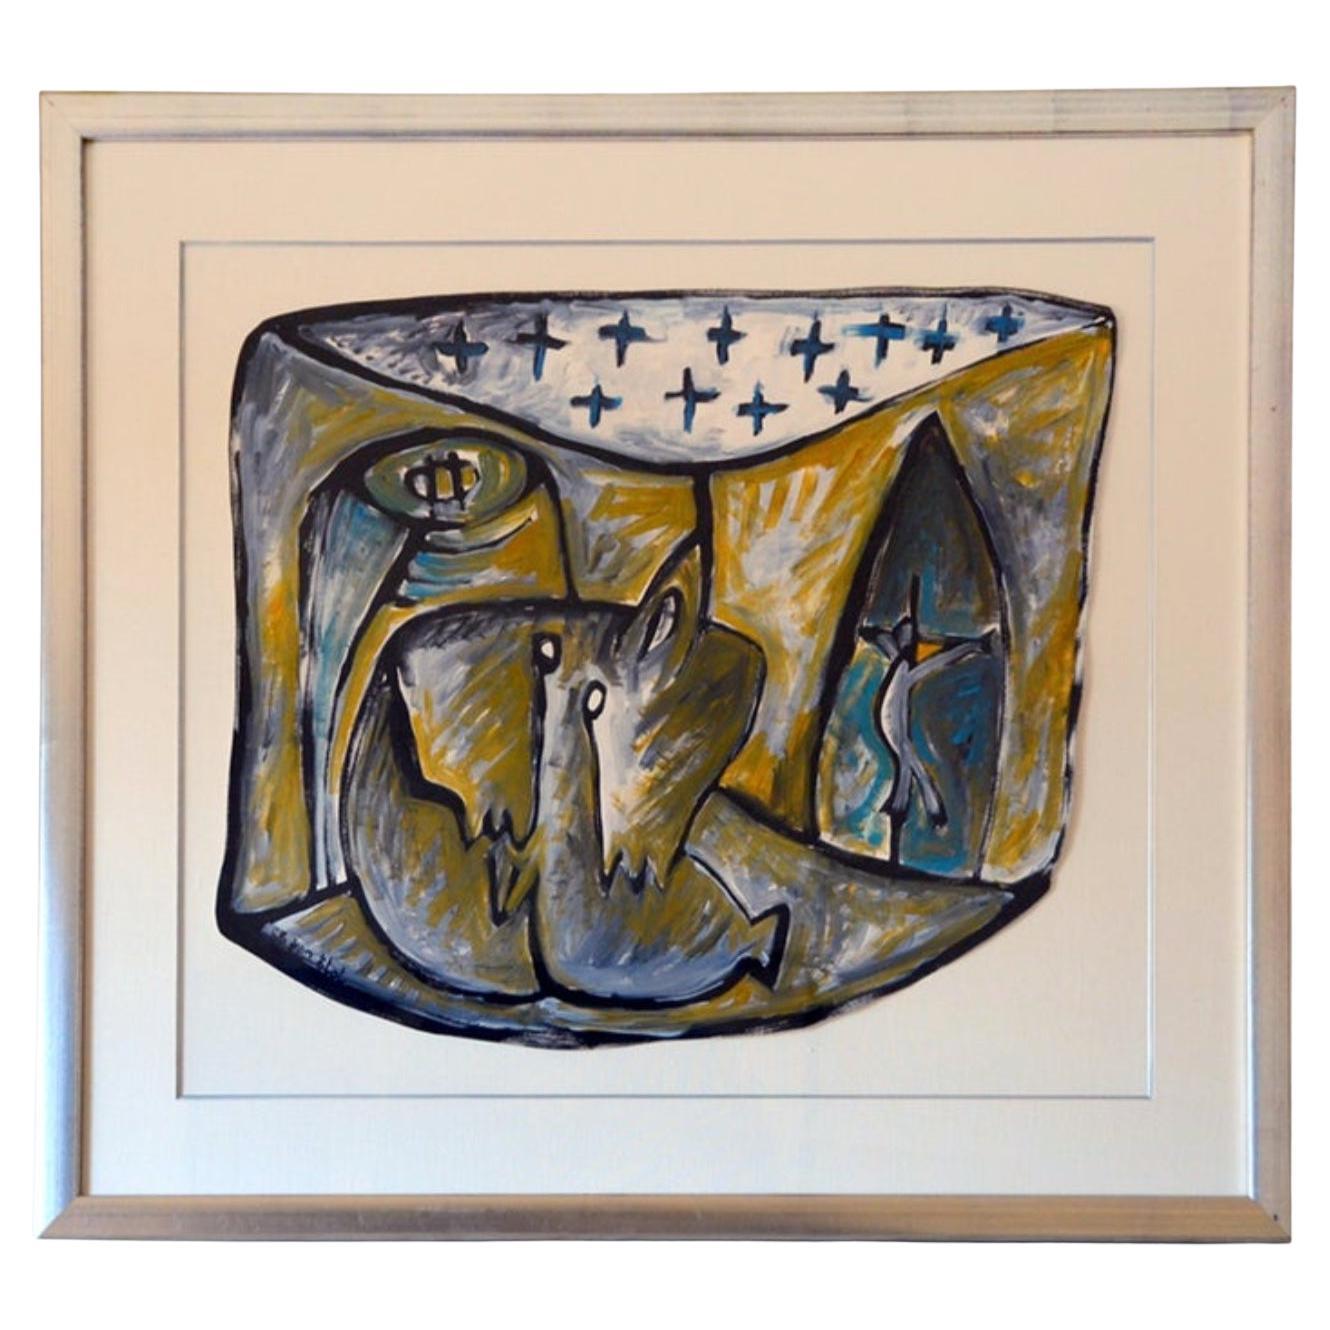 Framed Gouache on Paper Drawing by Jean-Jacques Blot